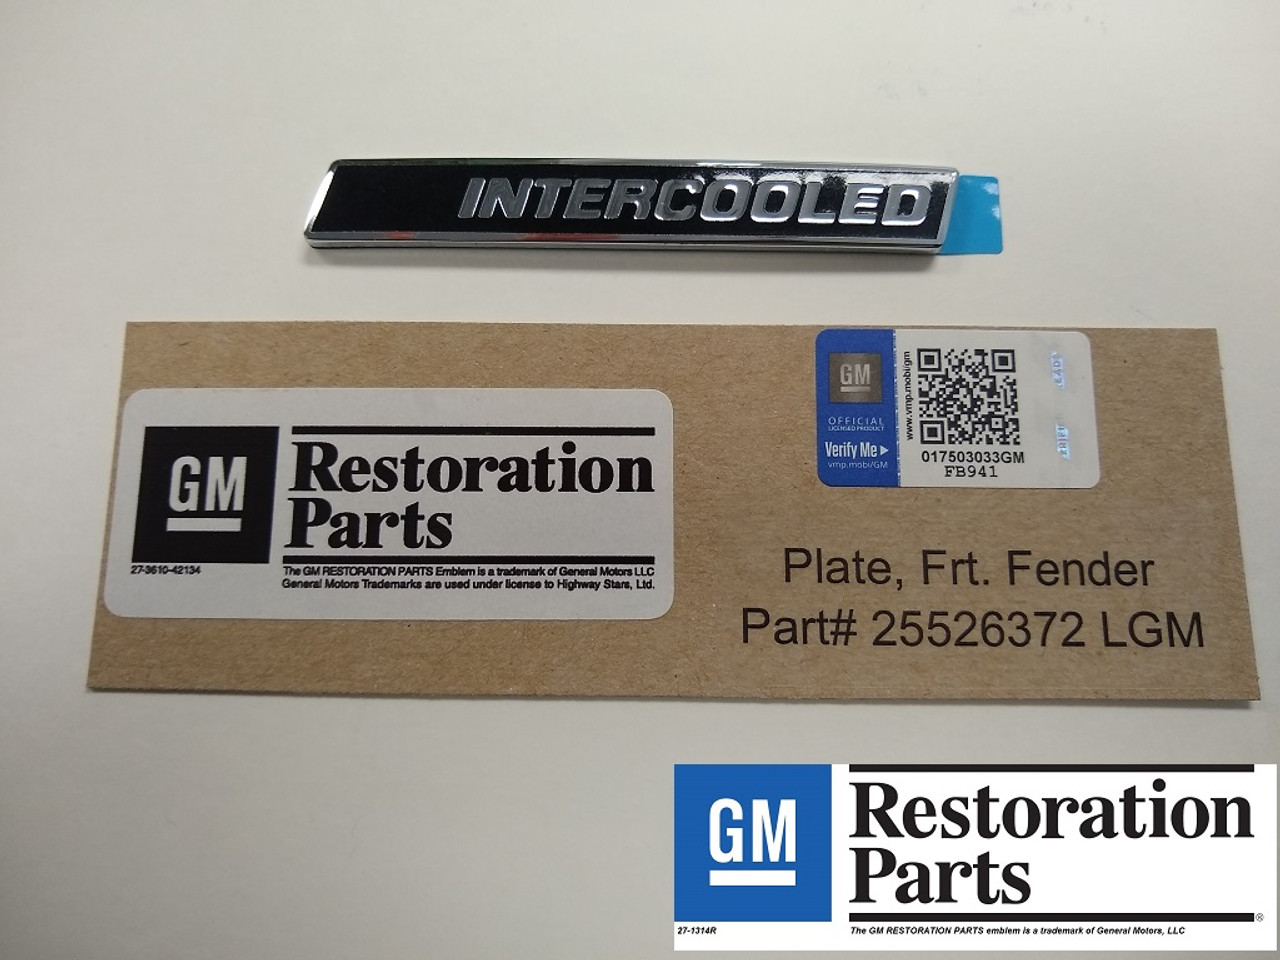 Licensed GM Restoration Intercooled badge # 25526372 LGM for 1986 1987 Buick Turbo Regal Grand National GNX